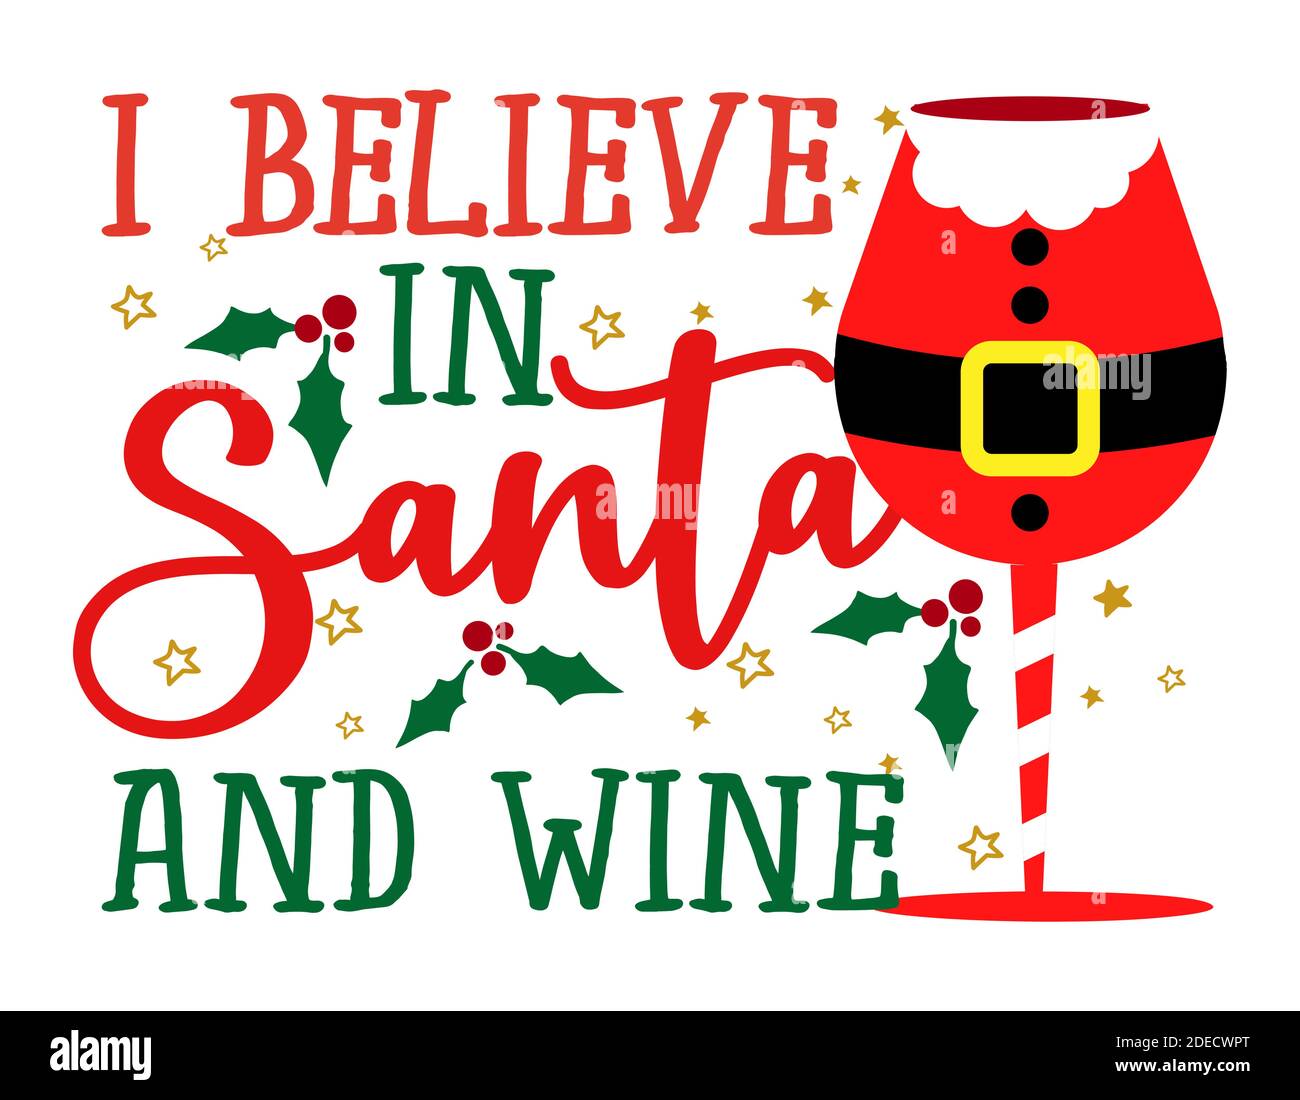 I believe in Santa and Wine - Santa colored wine glass. Red Wine bottle decorated Santa Claus costume with belt, snowflake, holly illustration. Vector Stock Vector